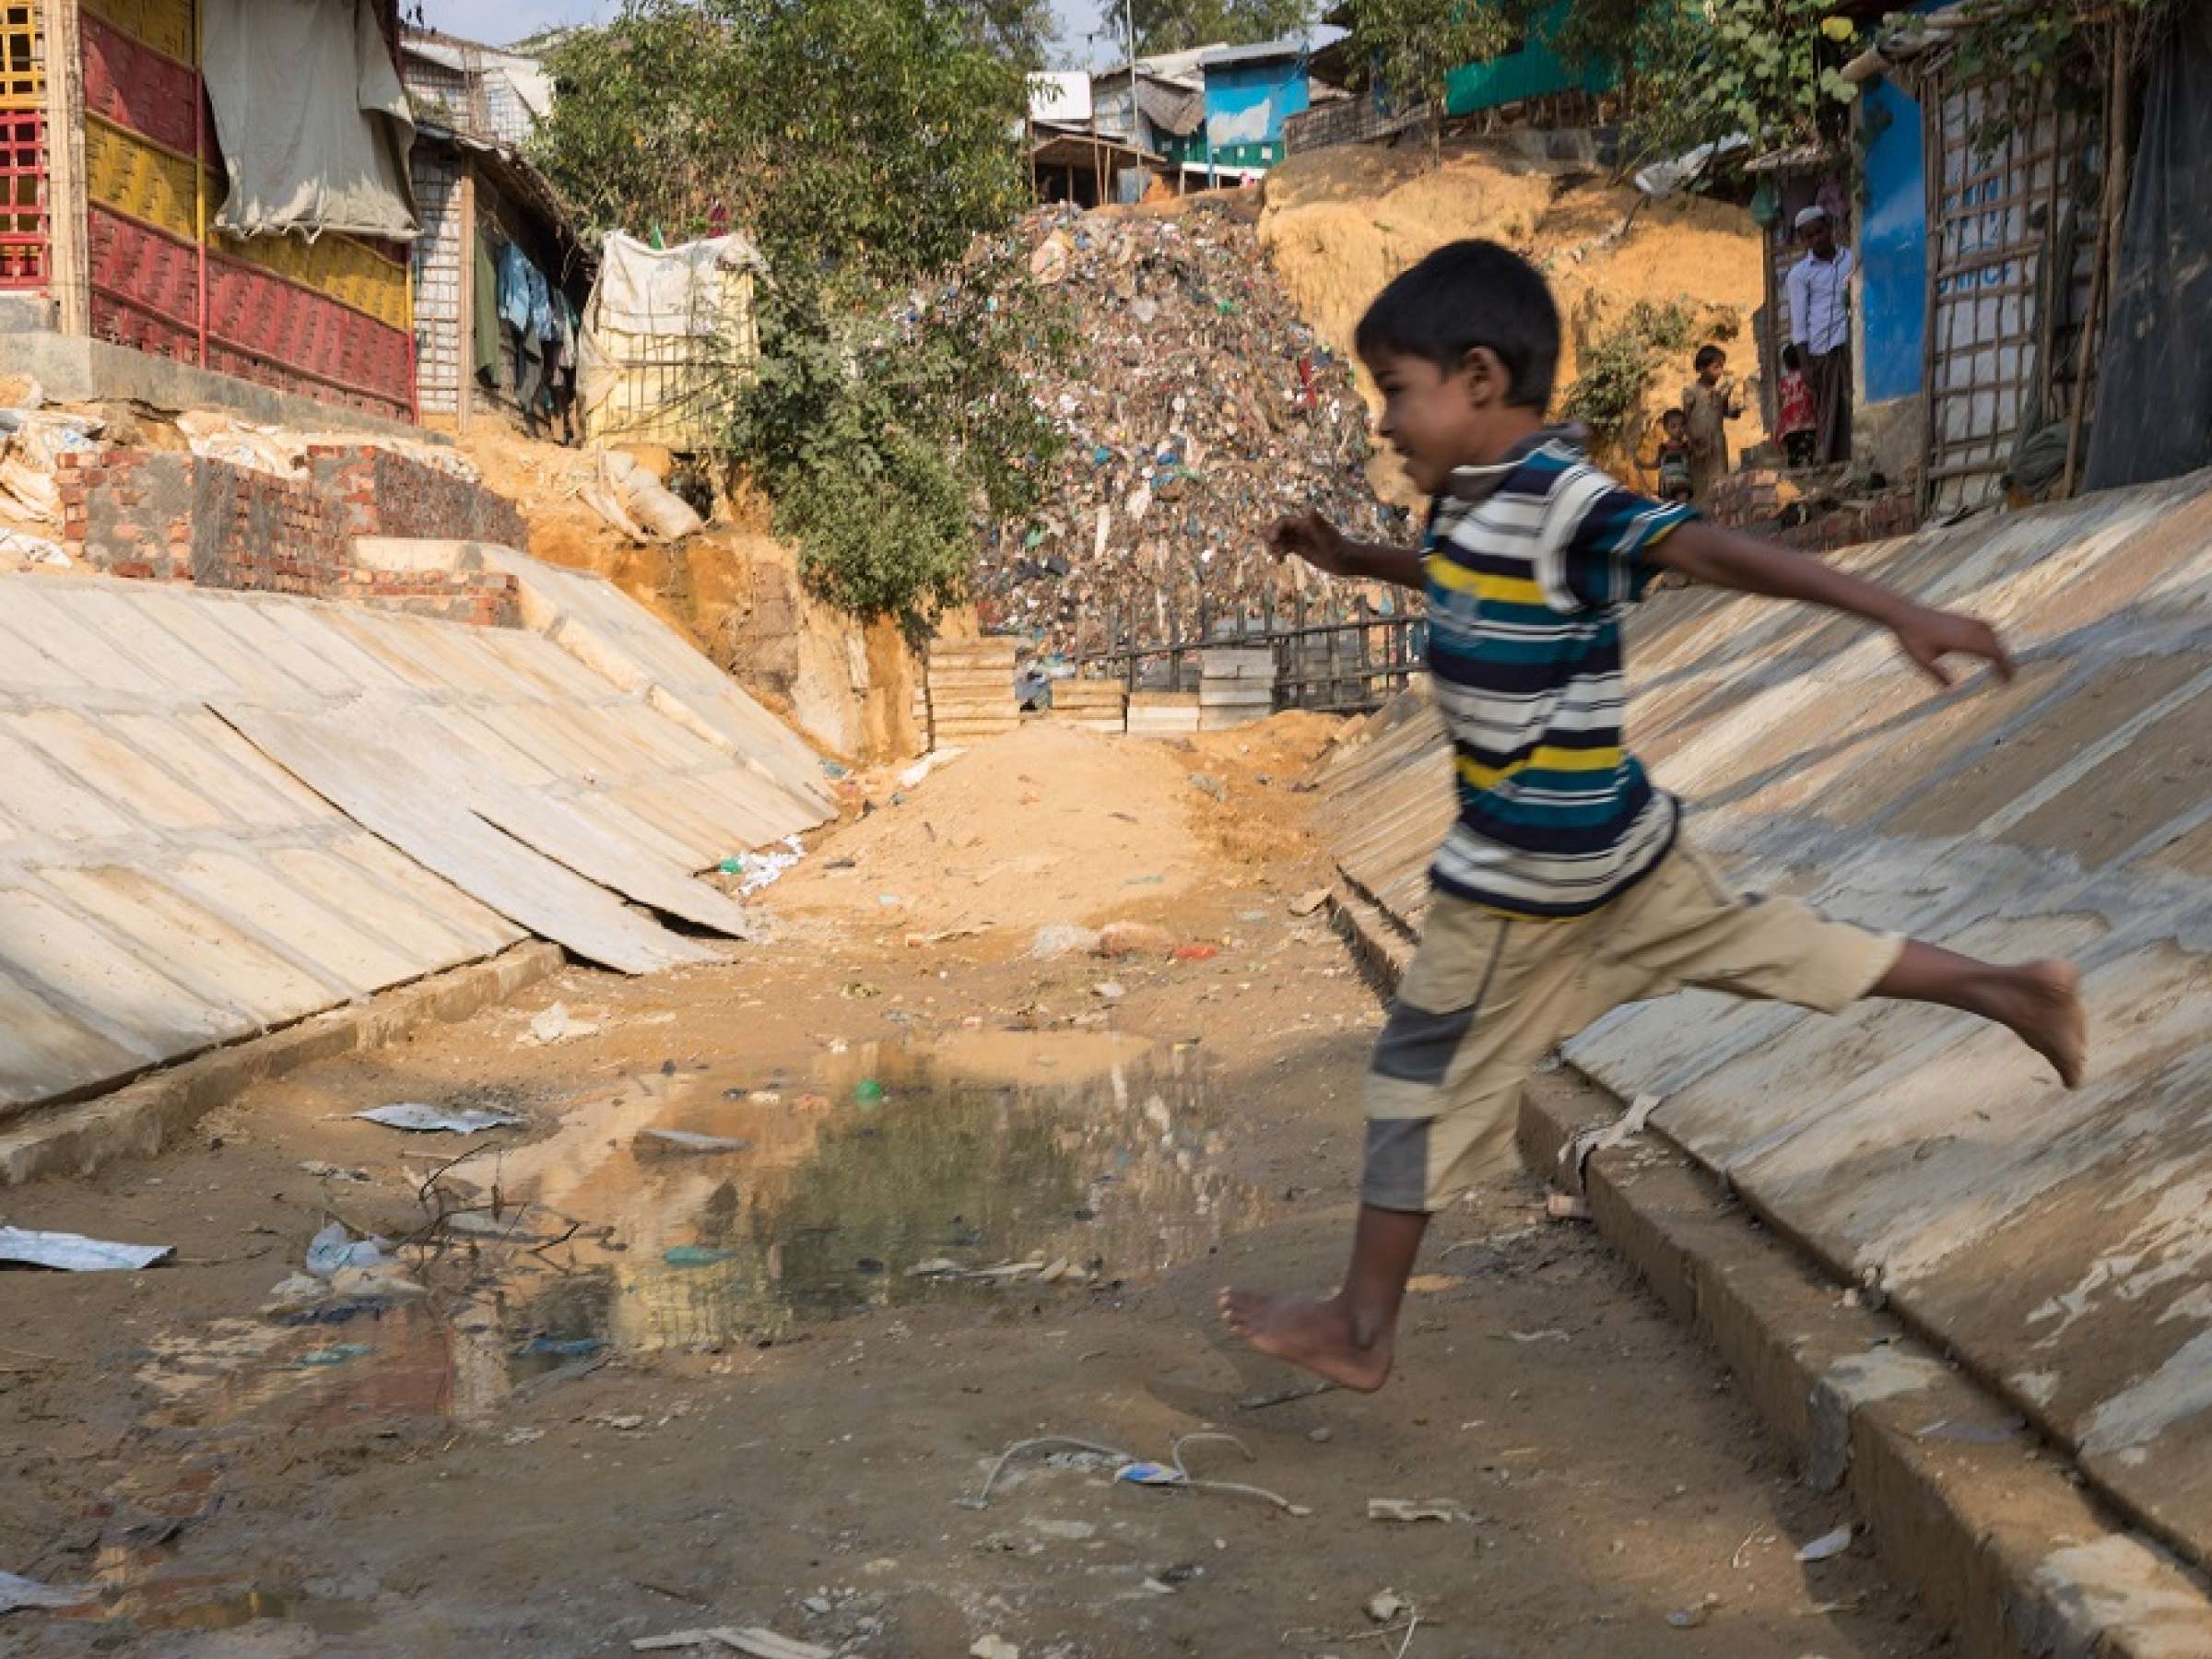 Child leaps over a drain in a camp in Bangladesh